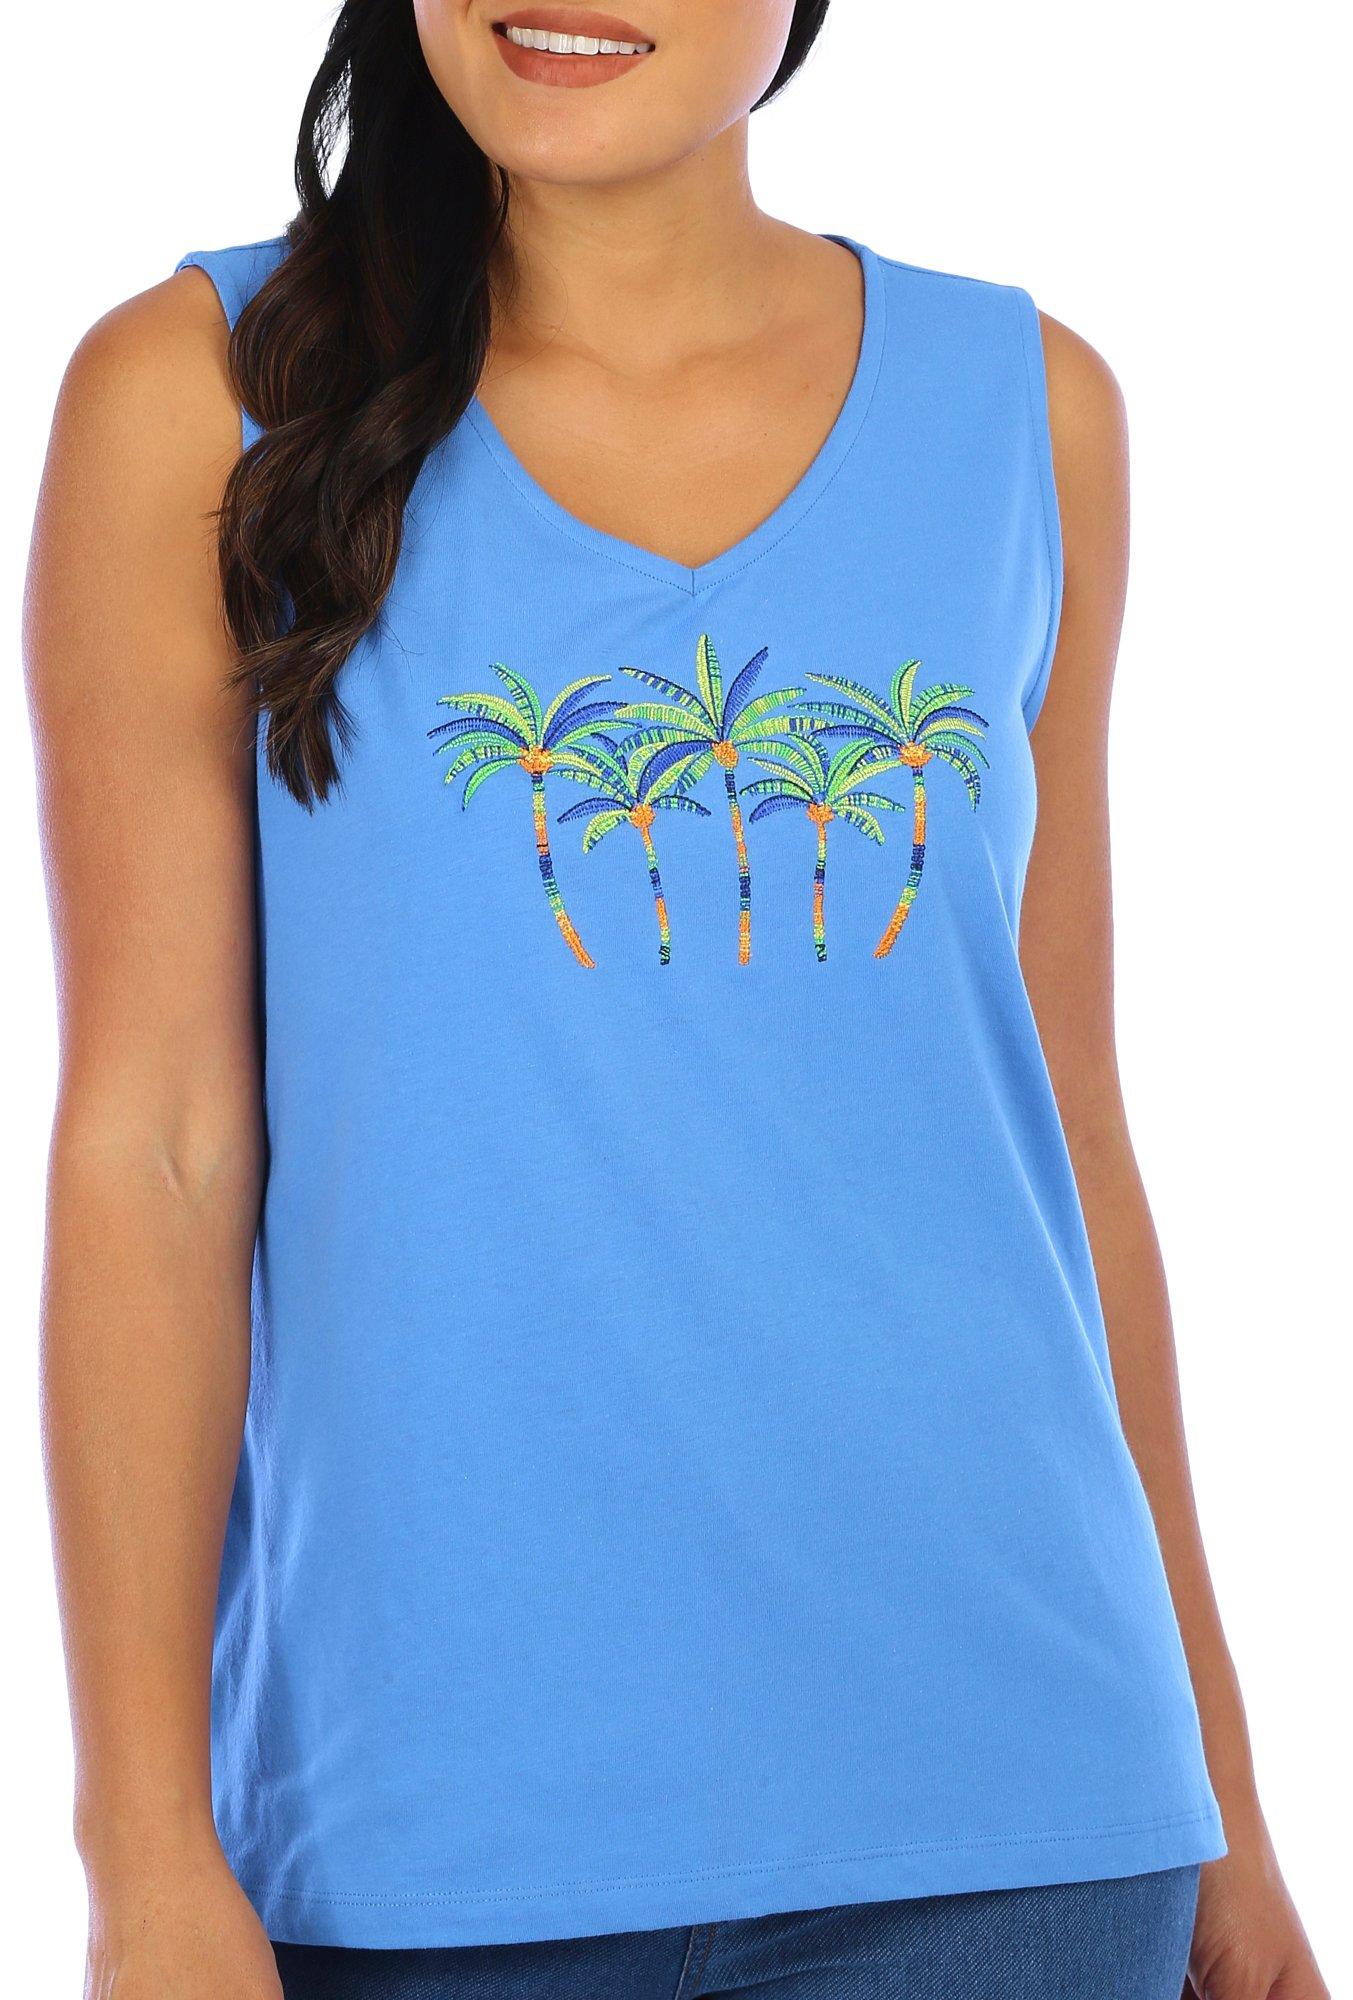 Coral Bay Plus Embroidered Palm Sleeveless Top